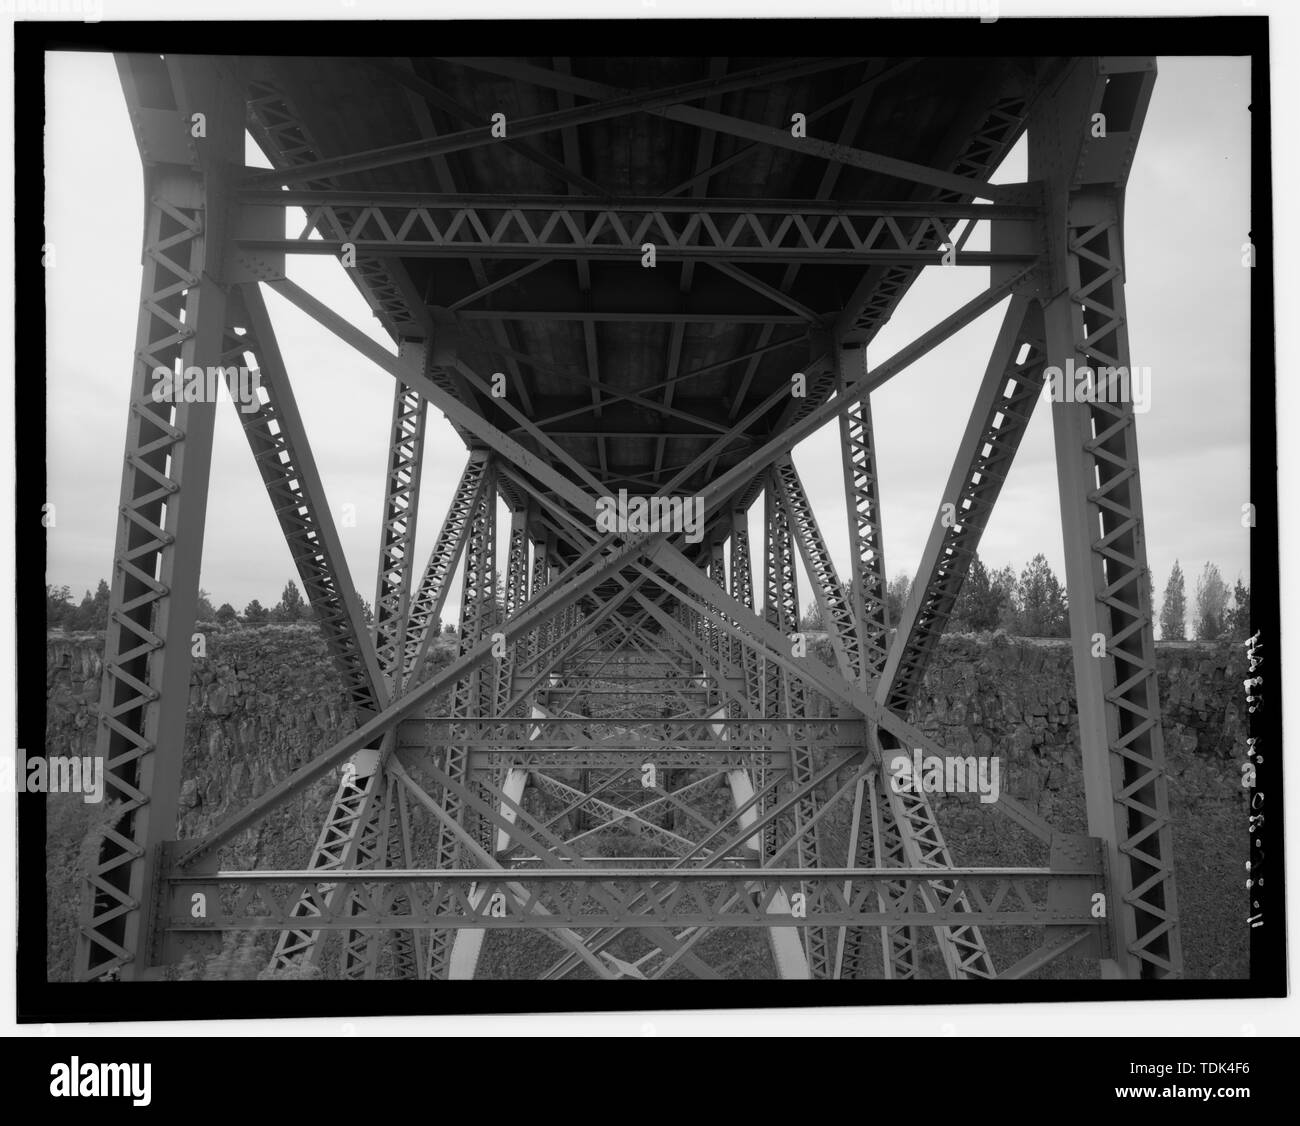 ONE-POINT PERSPECTIVE VIEW OF SUBSTRUCTURE - Crooked River High Bridge, Spanning Crooked River Gorge at Dalles-California Highway, Terrebonne, Deschutes County, OR Stock Photo